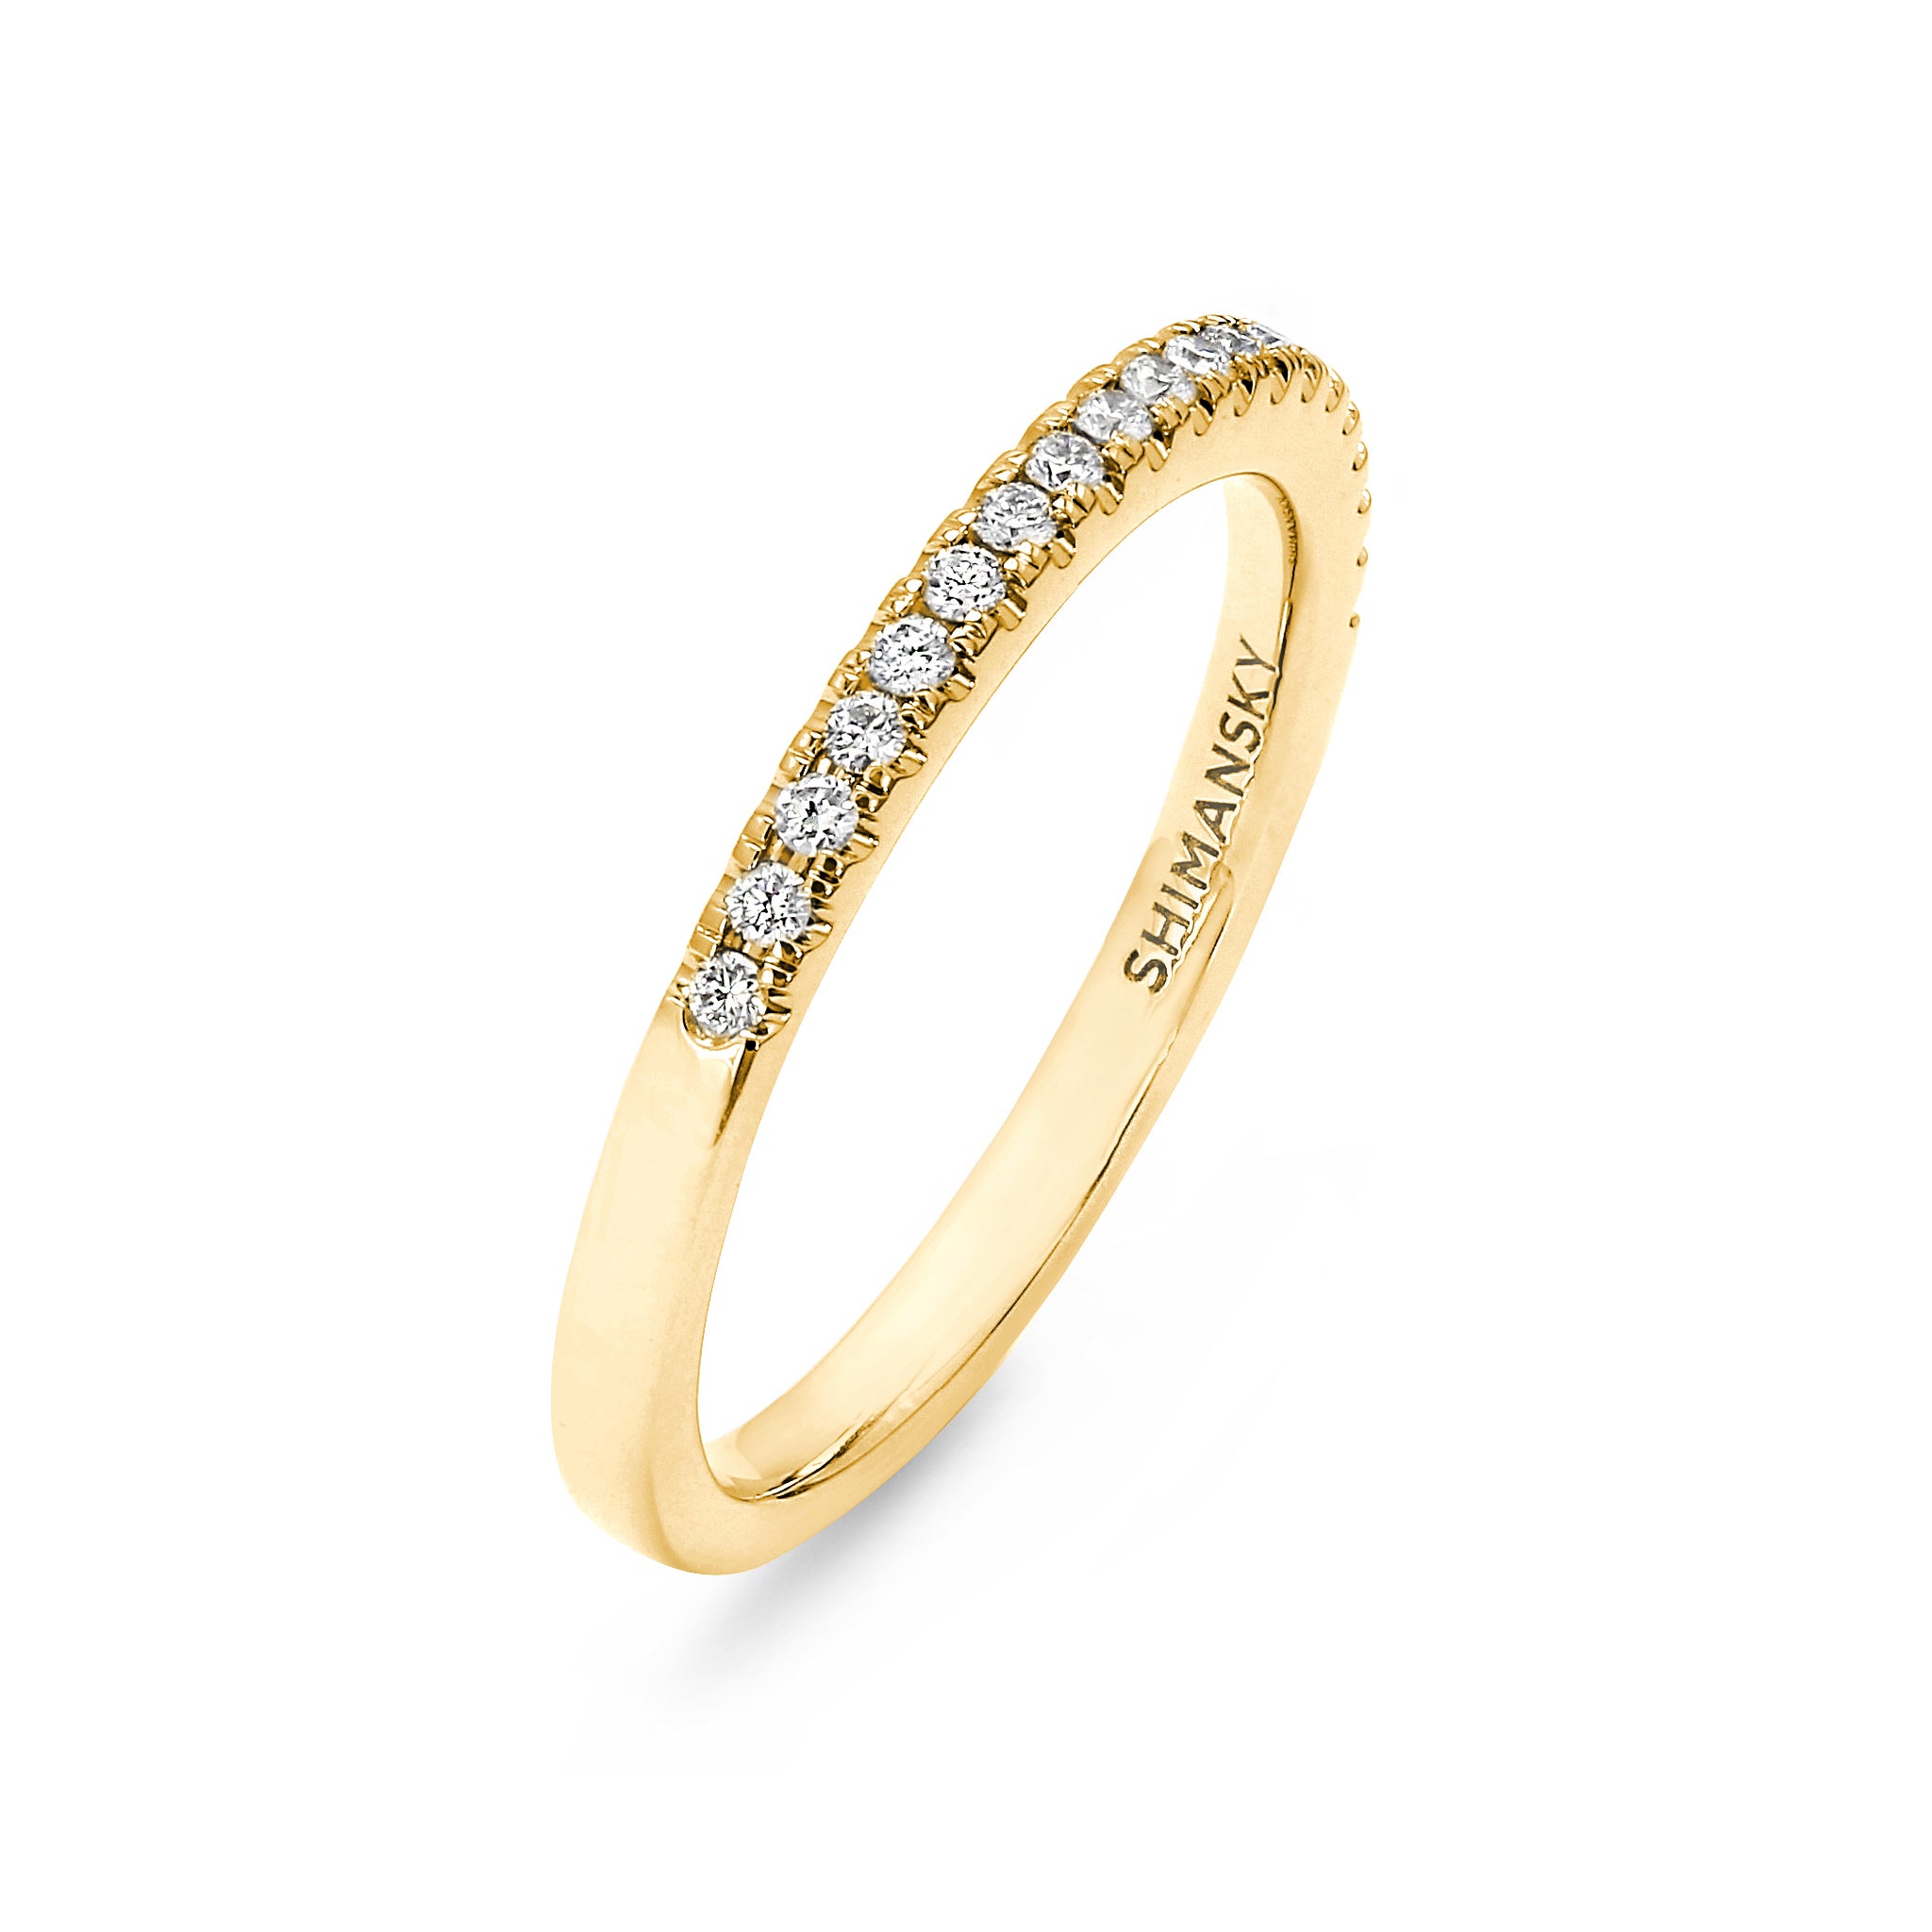 Shimansky - Ladies Diamond Wedding Band Crafted in 18K Yellow Gold